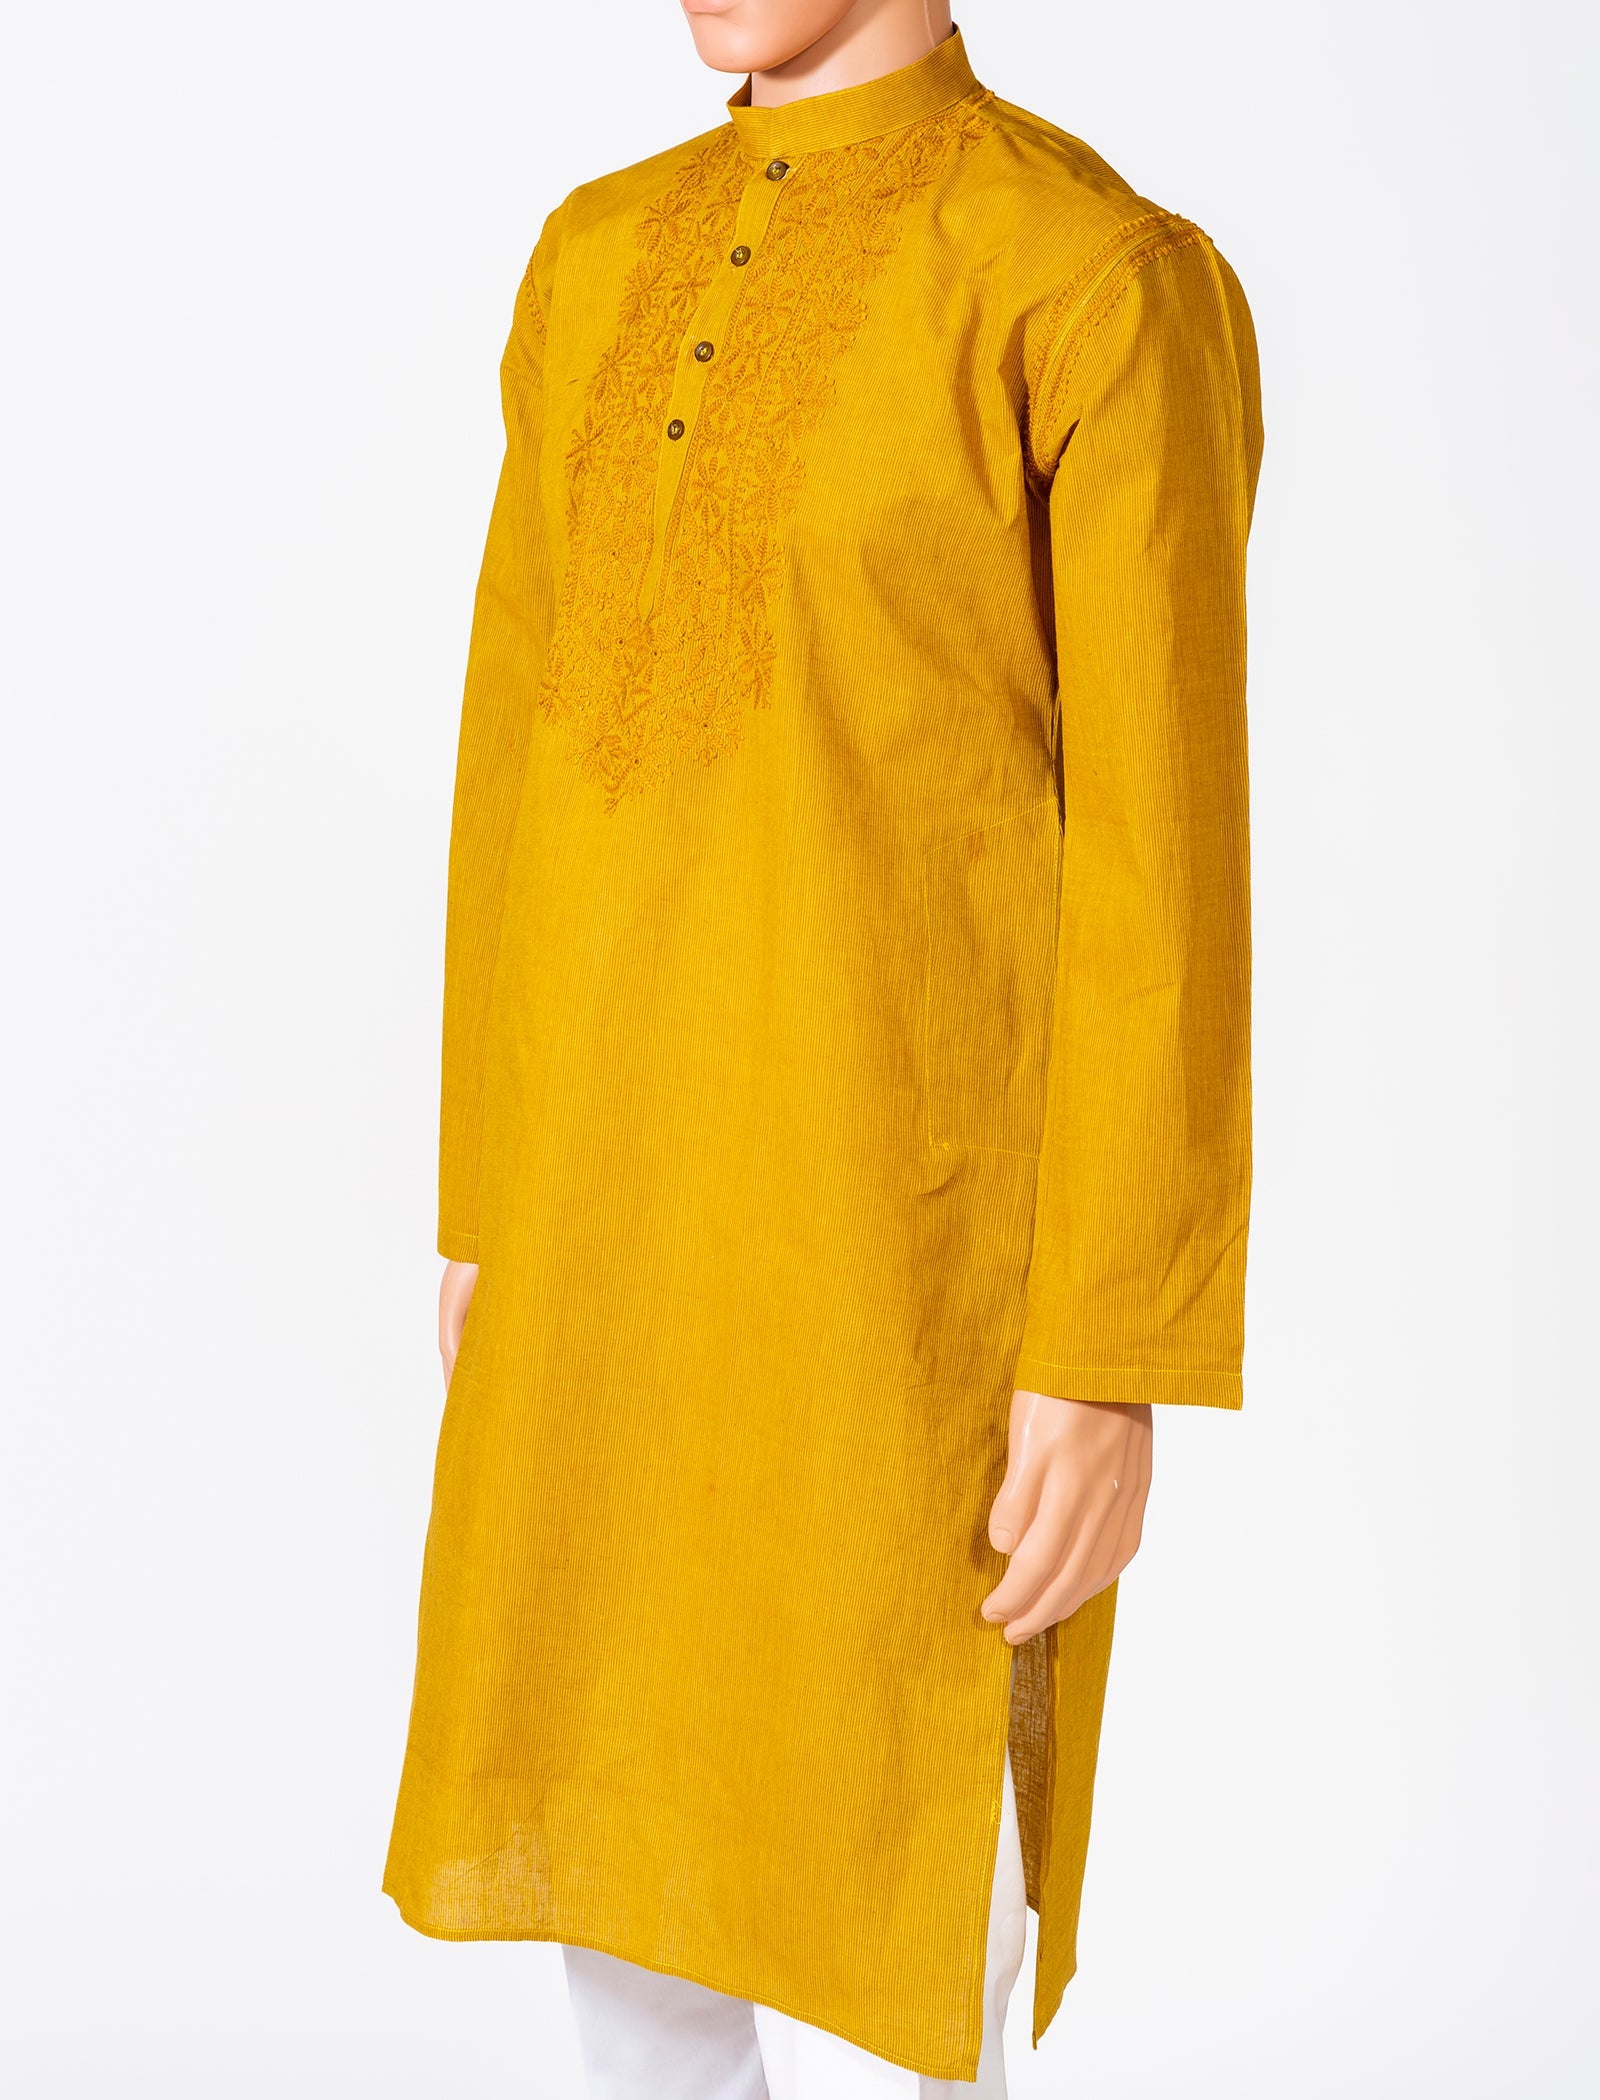 Lucknow Chikan Emporium Cotton Mustered Colour Gents Kurta With Self Stripes And Fancy Hand Chikankari On Neck.